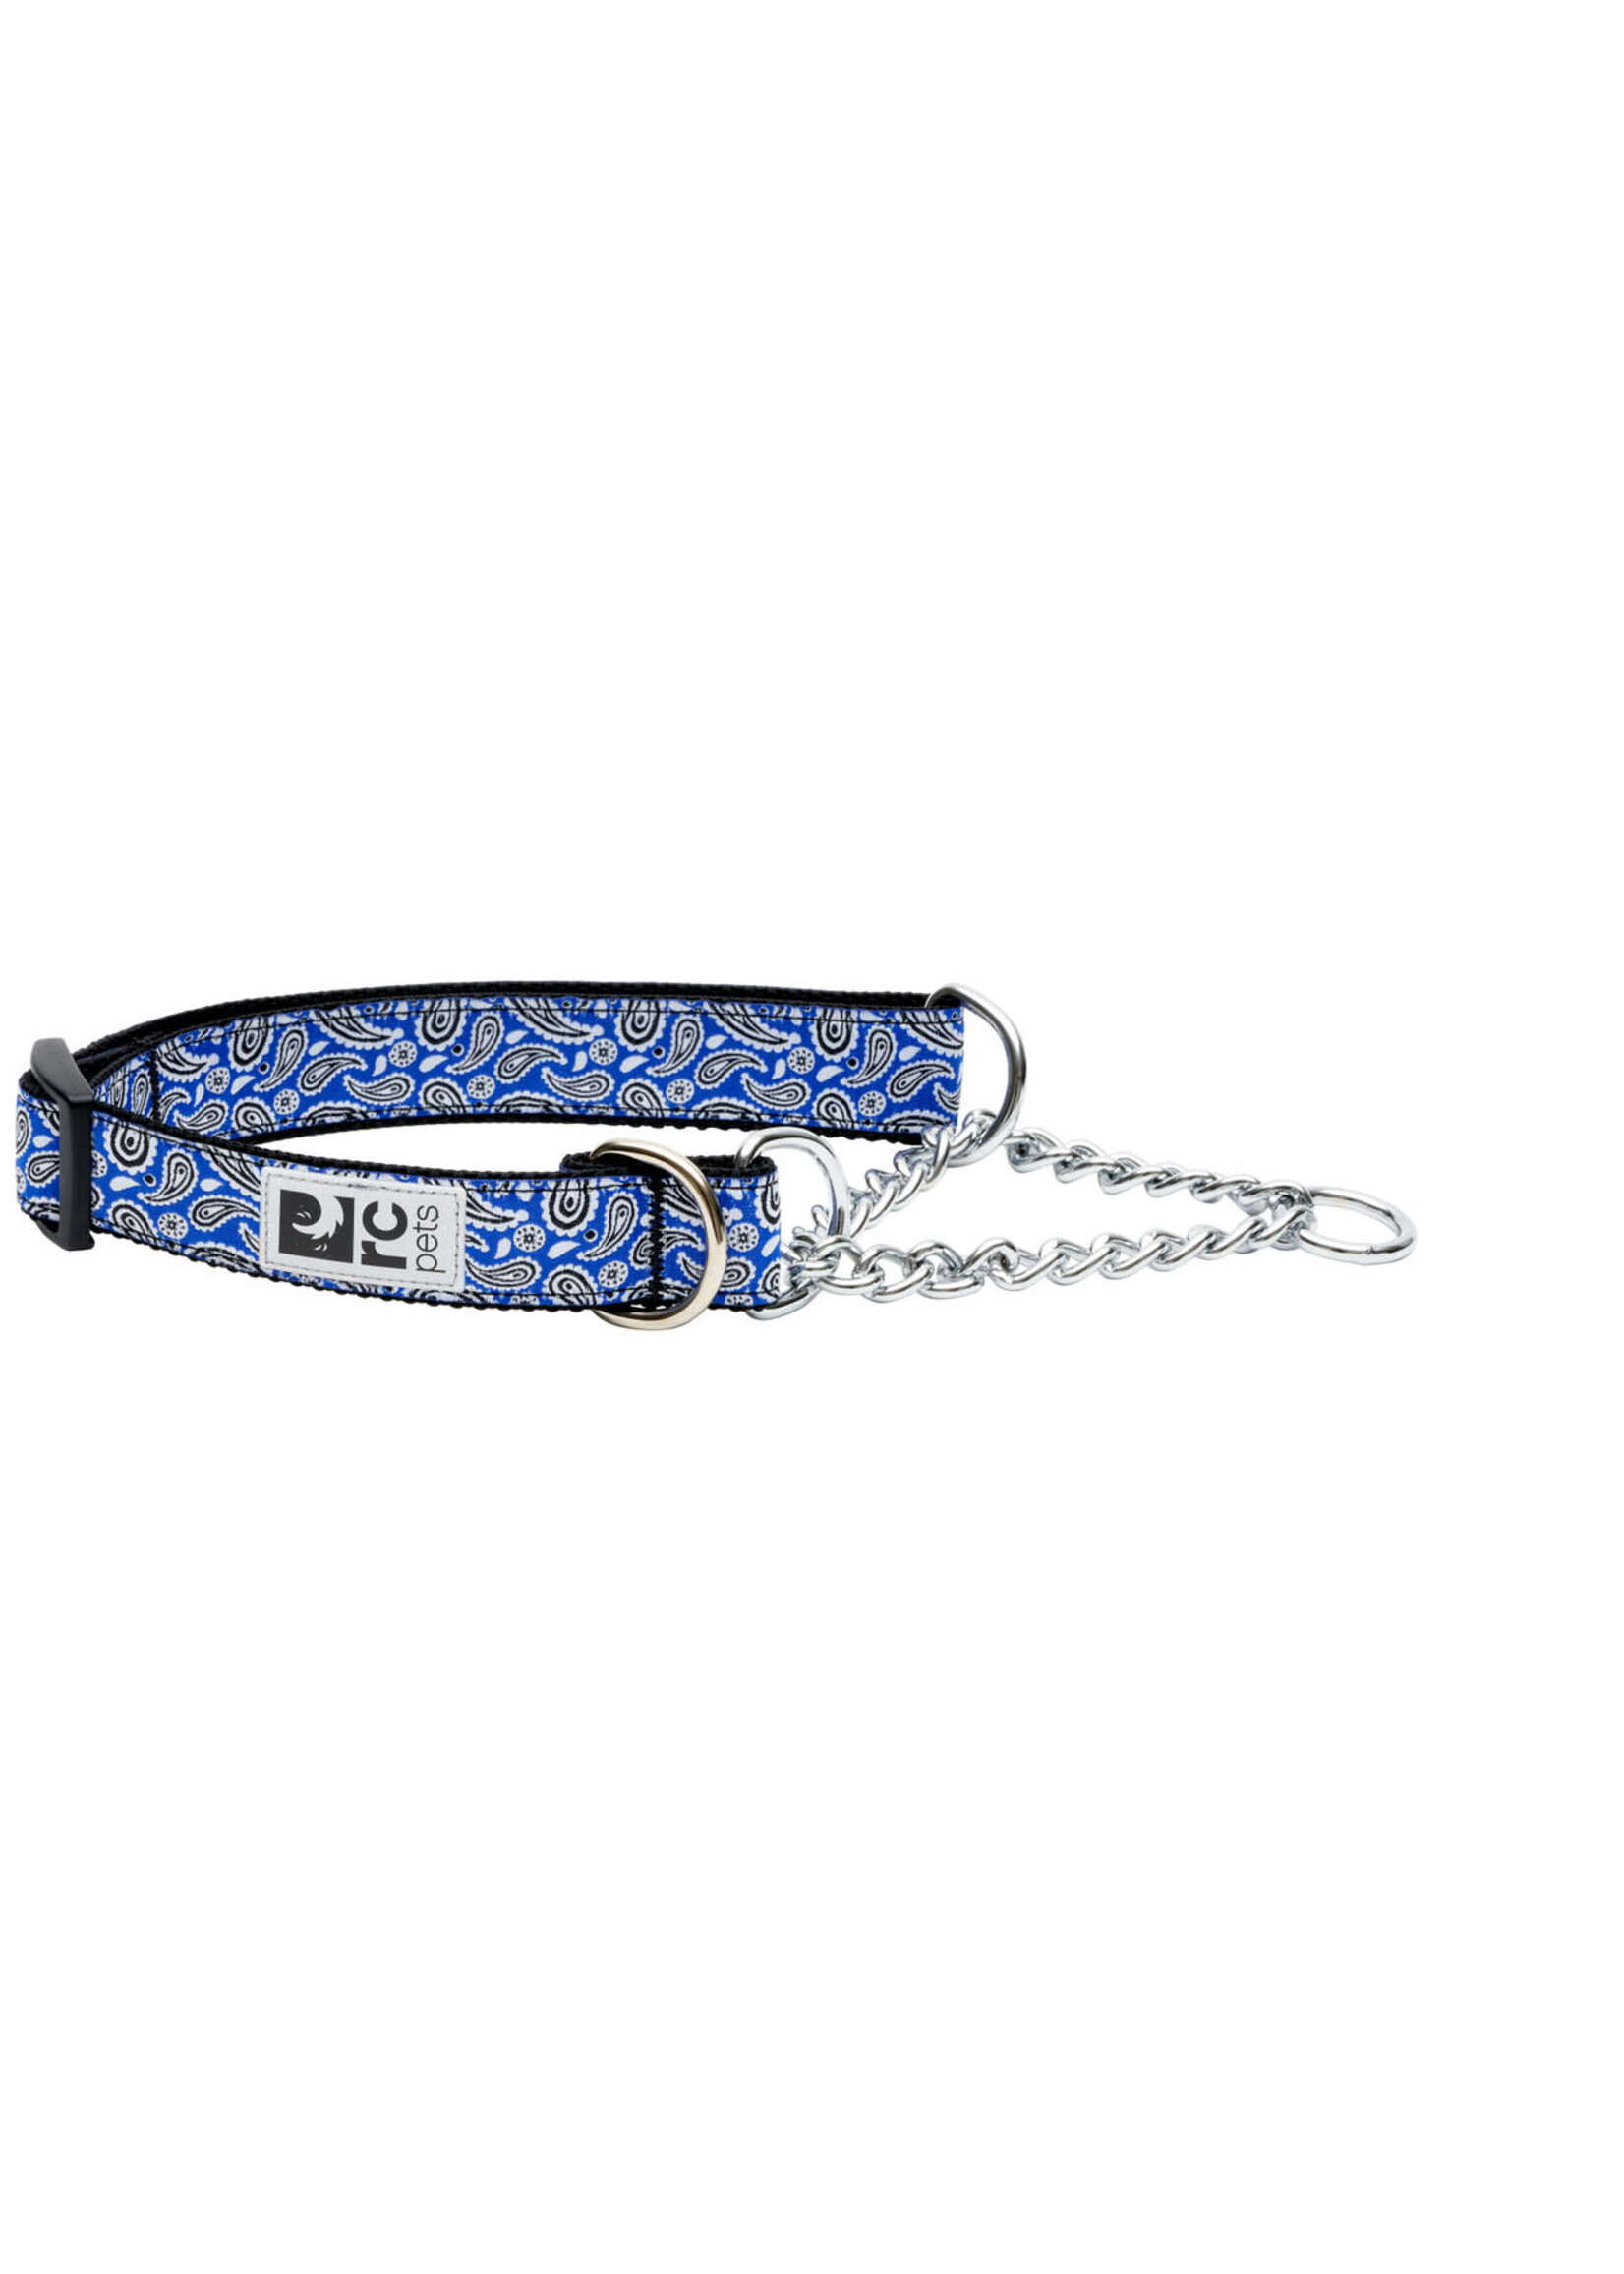 RC Pets Products RC Pets - Training Collar Rebel Blue